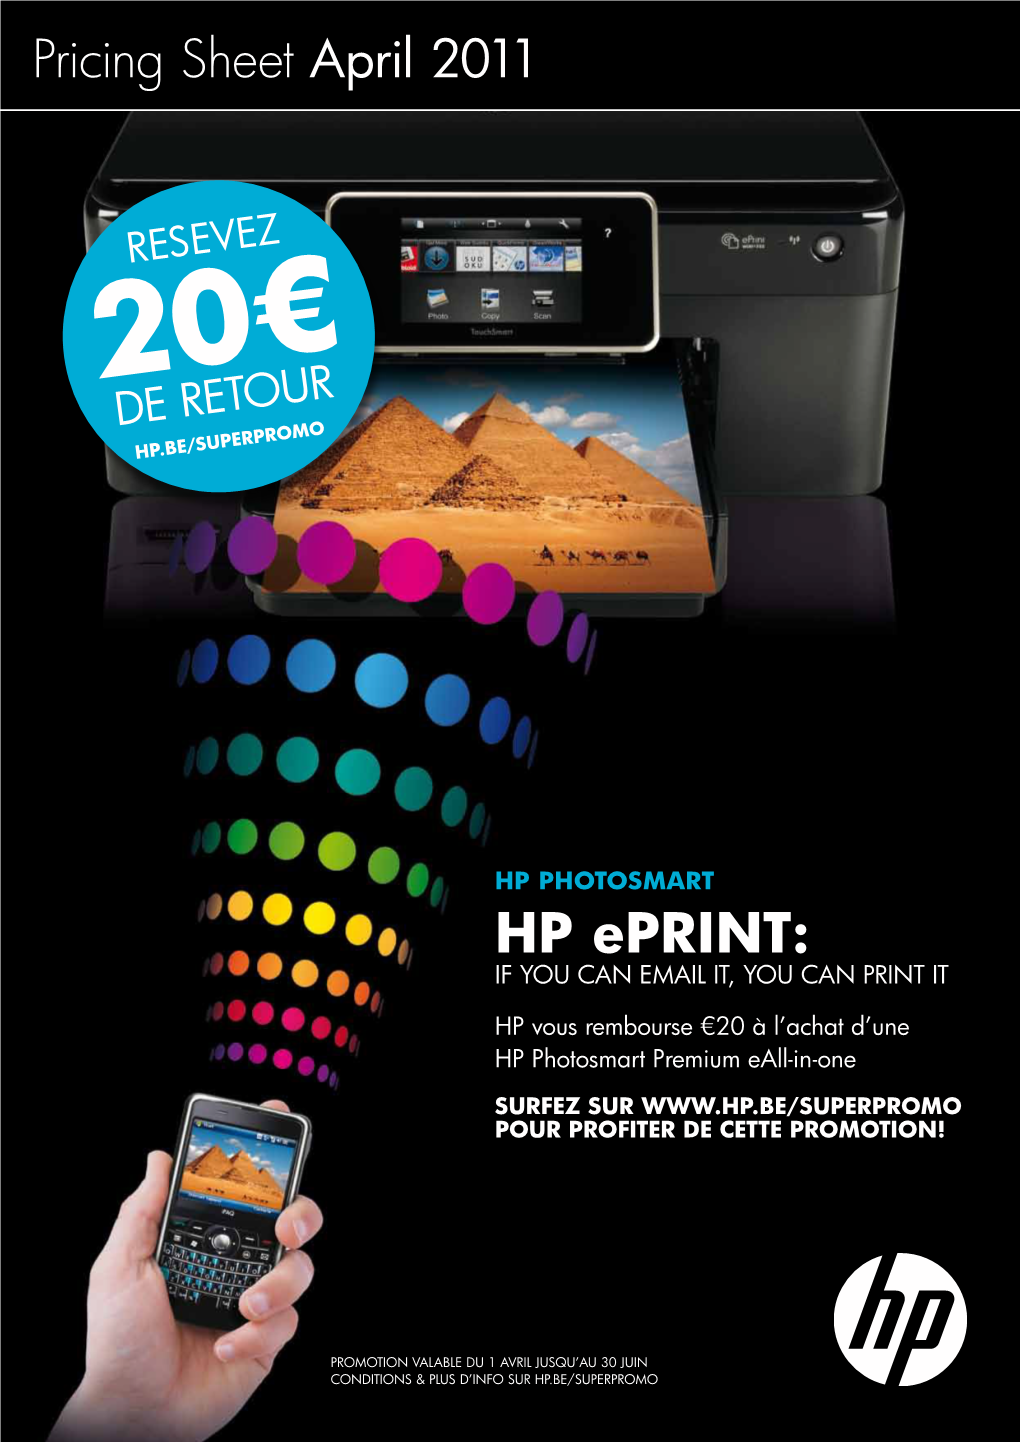 HP Eprint: If You Can Email It, You Can Print It